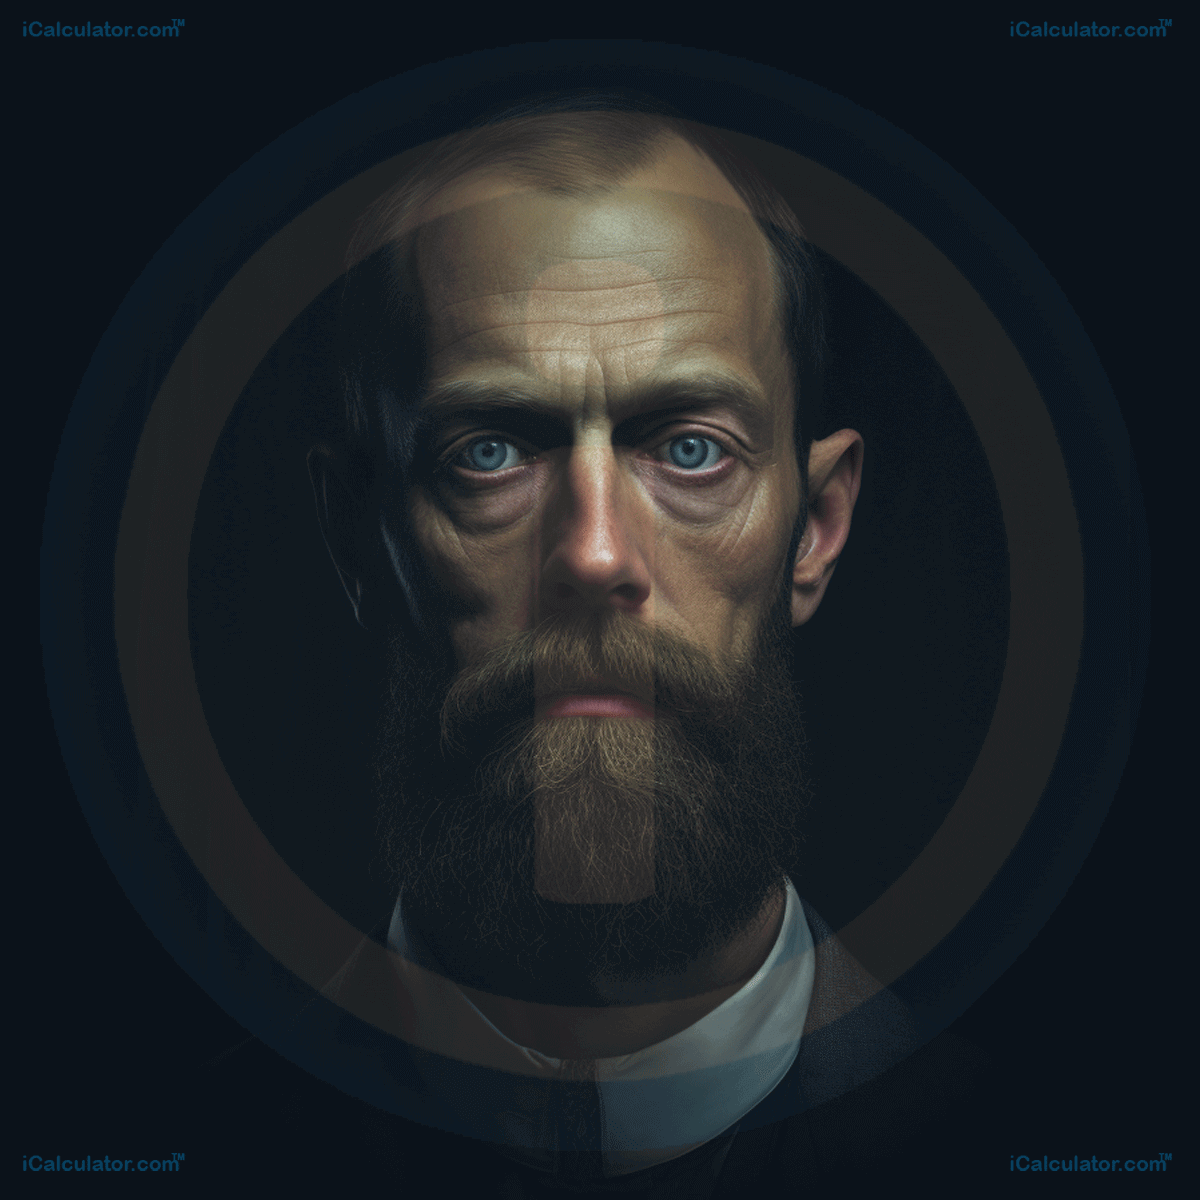 This image shows the physists Heinrich Hertz, a renowned scientist who advanced the world of phyics. Heinrich Hertz: The Physicist Who Illuminated the World of Waves